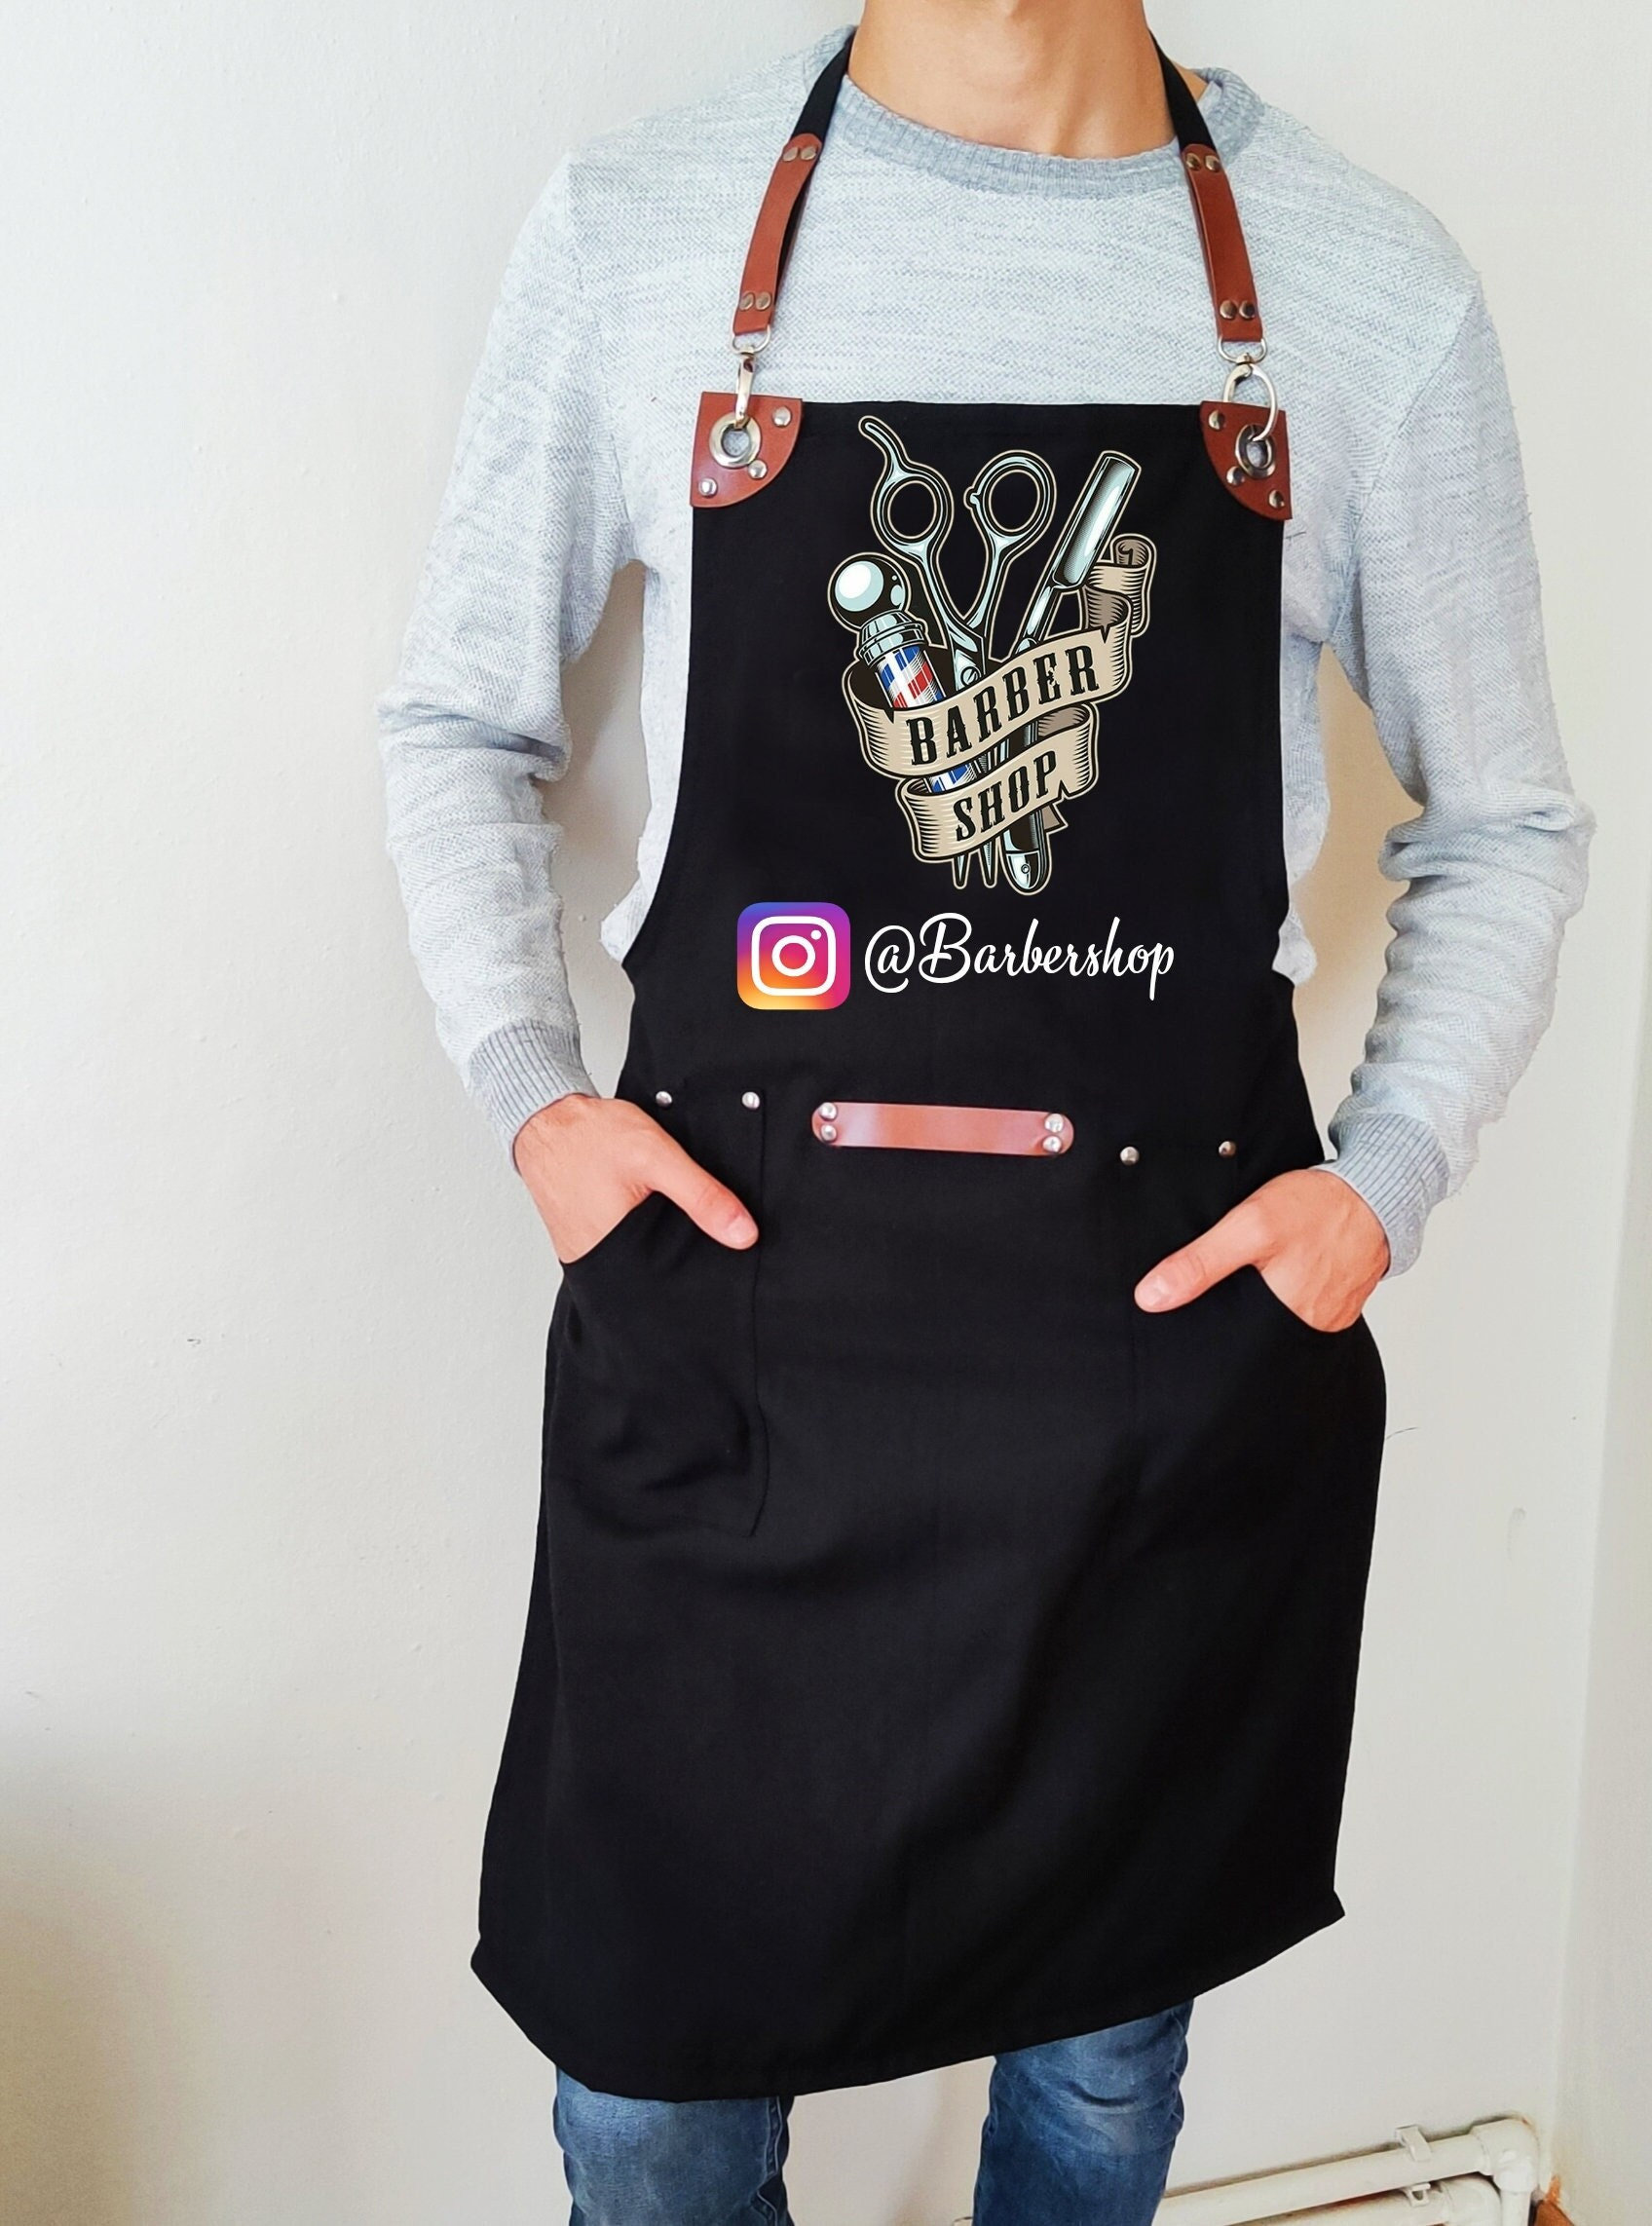 Coume Hair Stylist Apron Hairstylist Salon Apron with Rhinestone Tools and  3 Pockets Waterproof Hairdresser Barber Aprons Hair Dryer Style